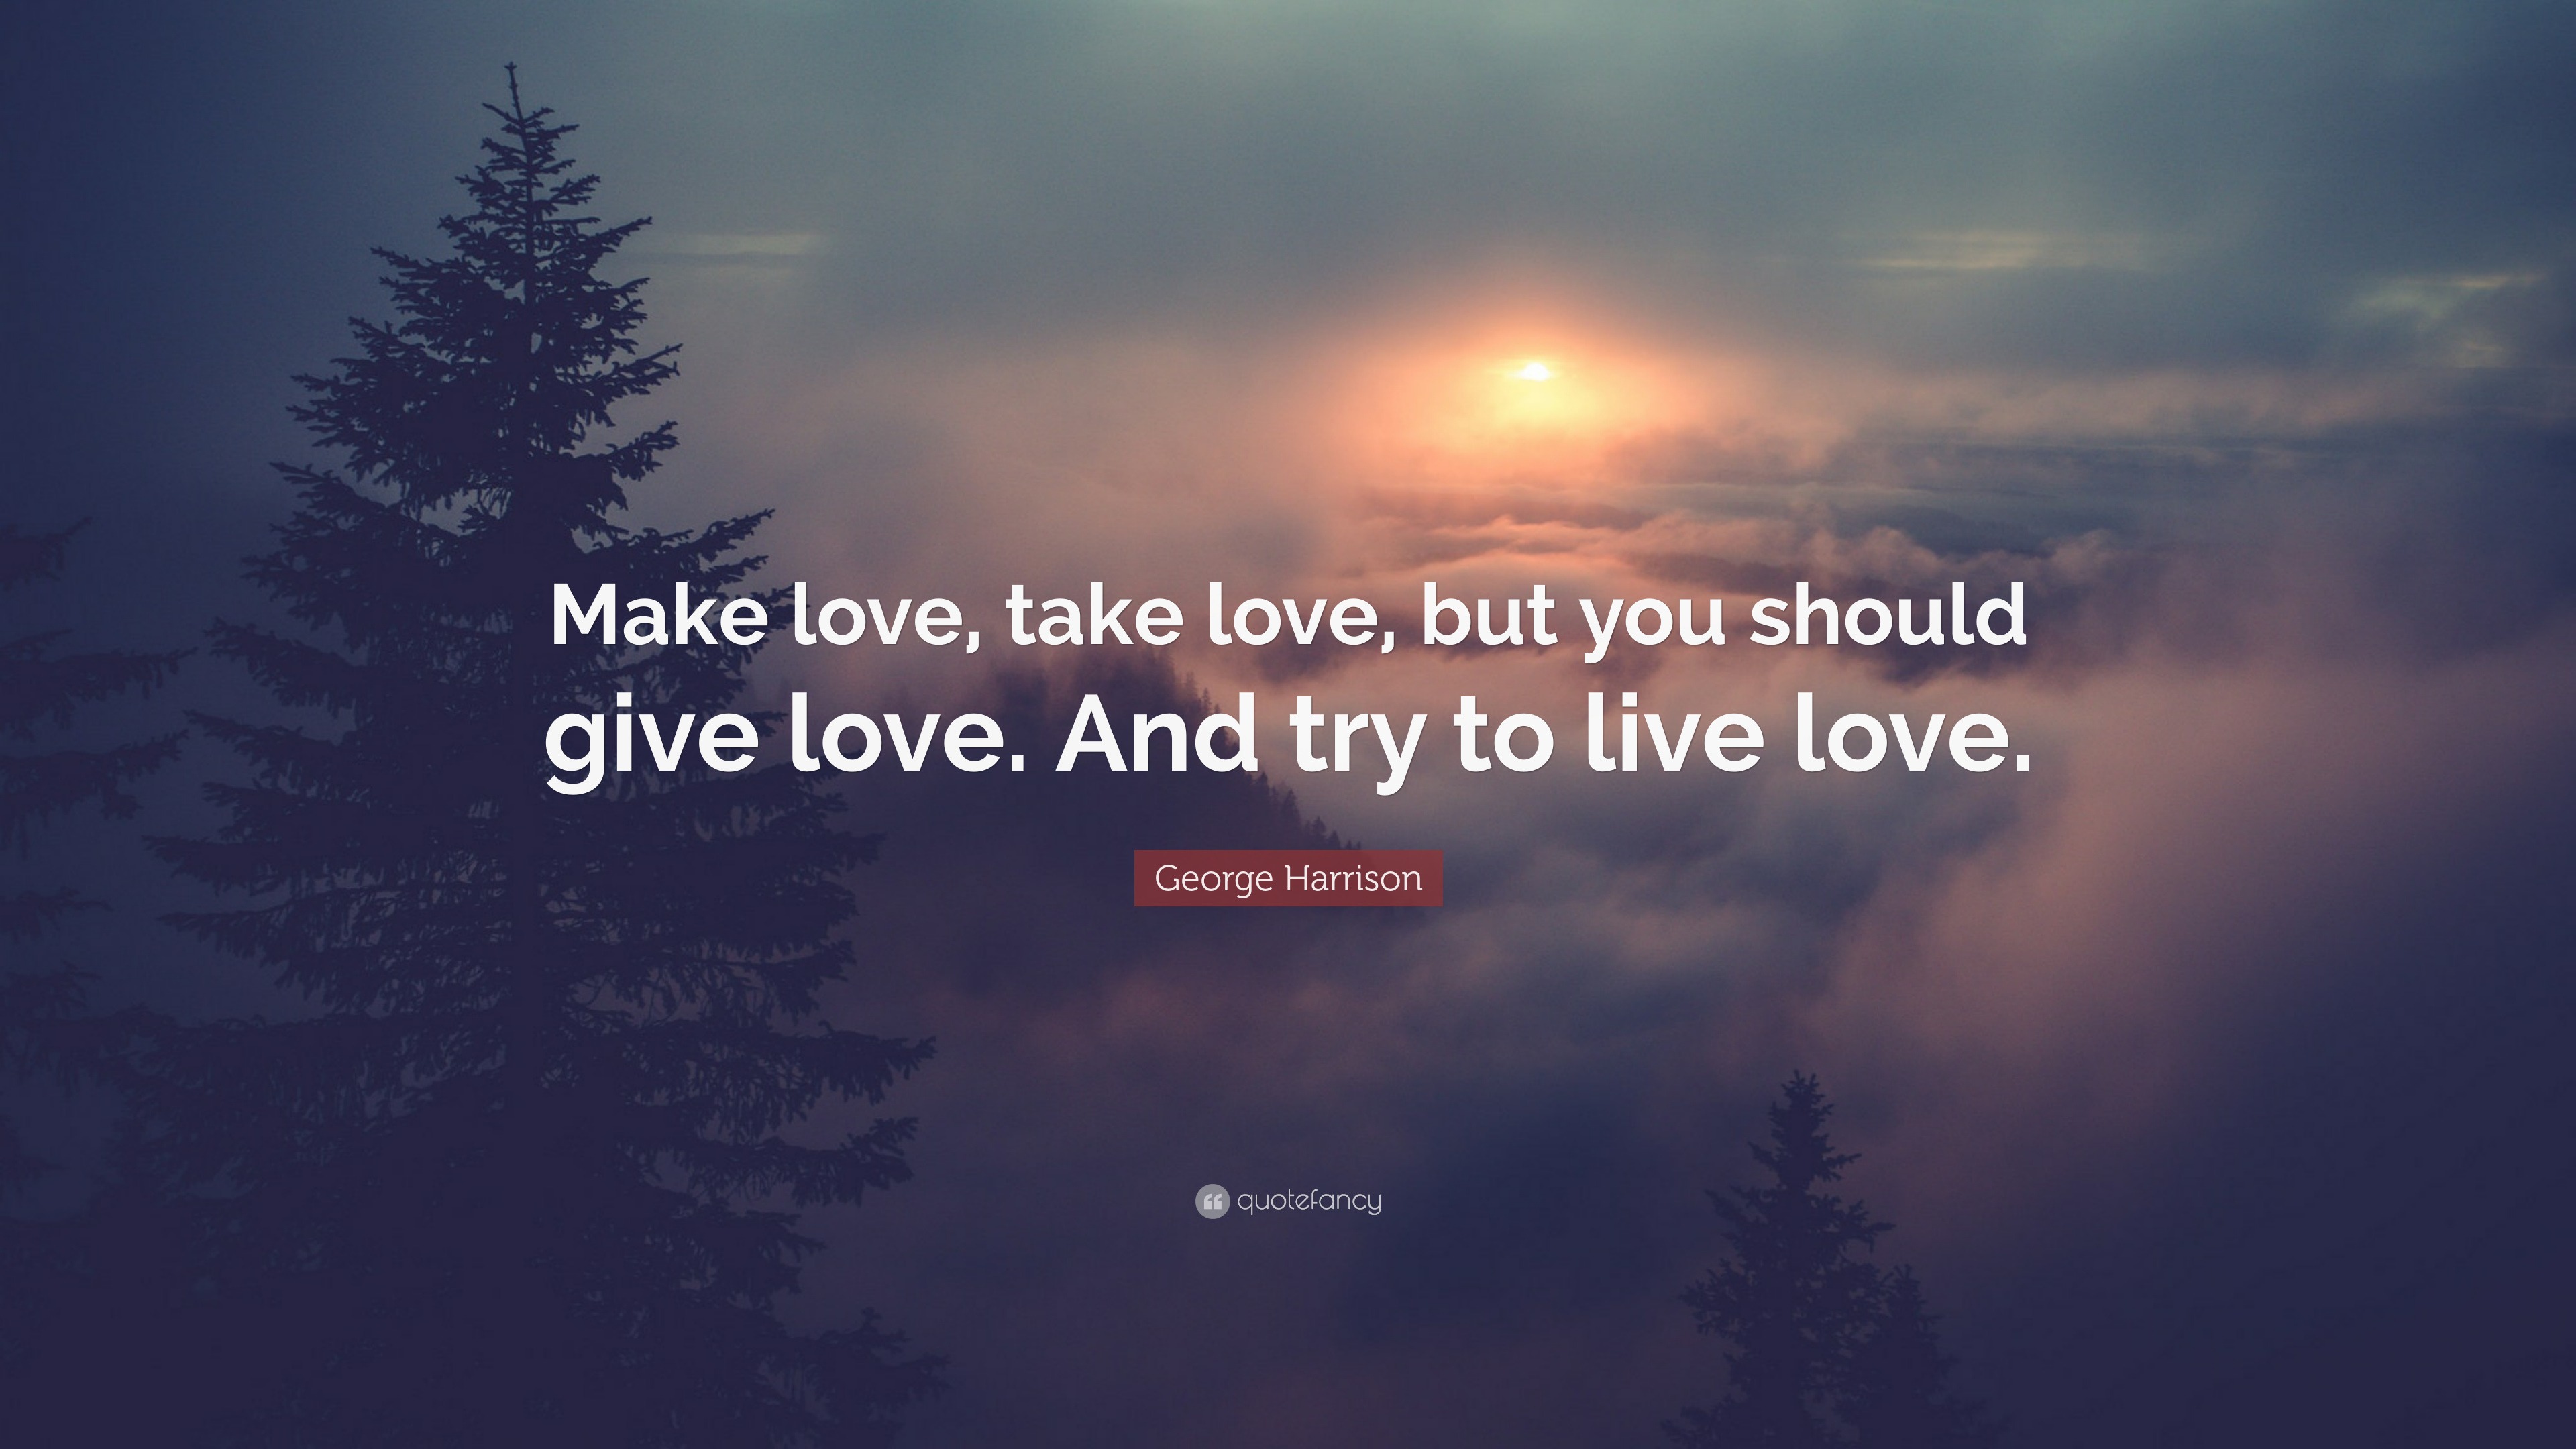 George Harrison Quote: “Make love, take love, but you should give love. And  try to live